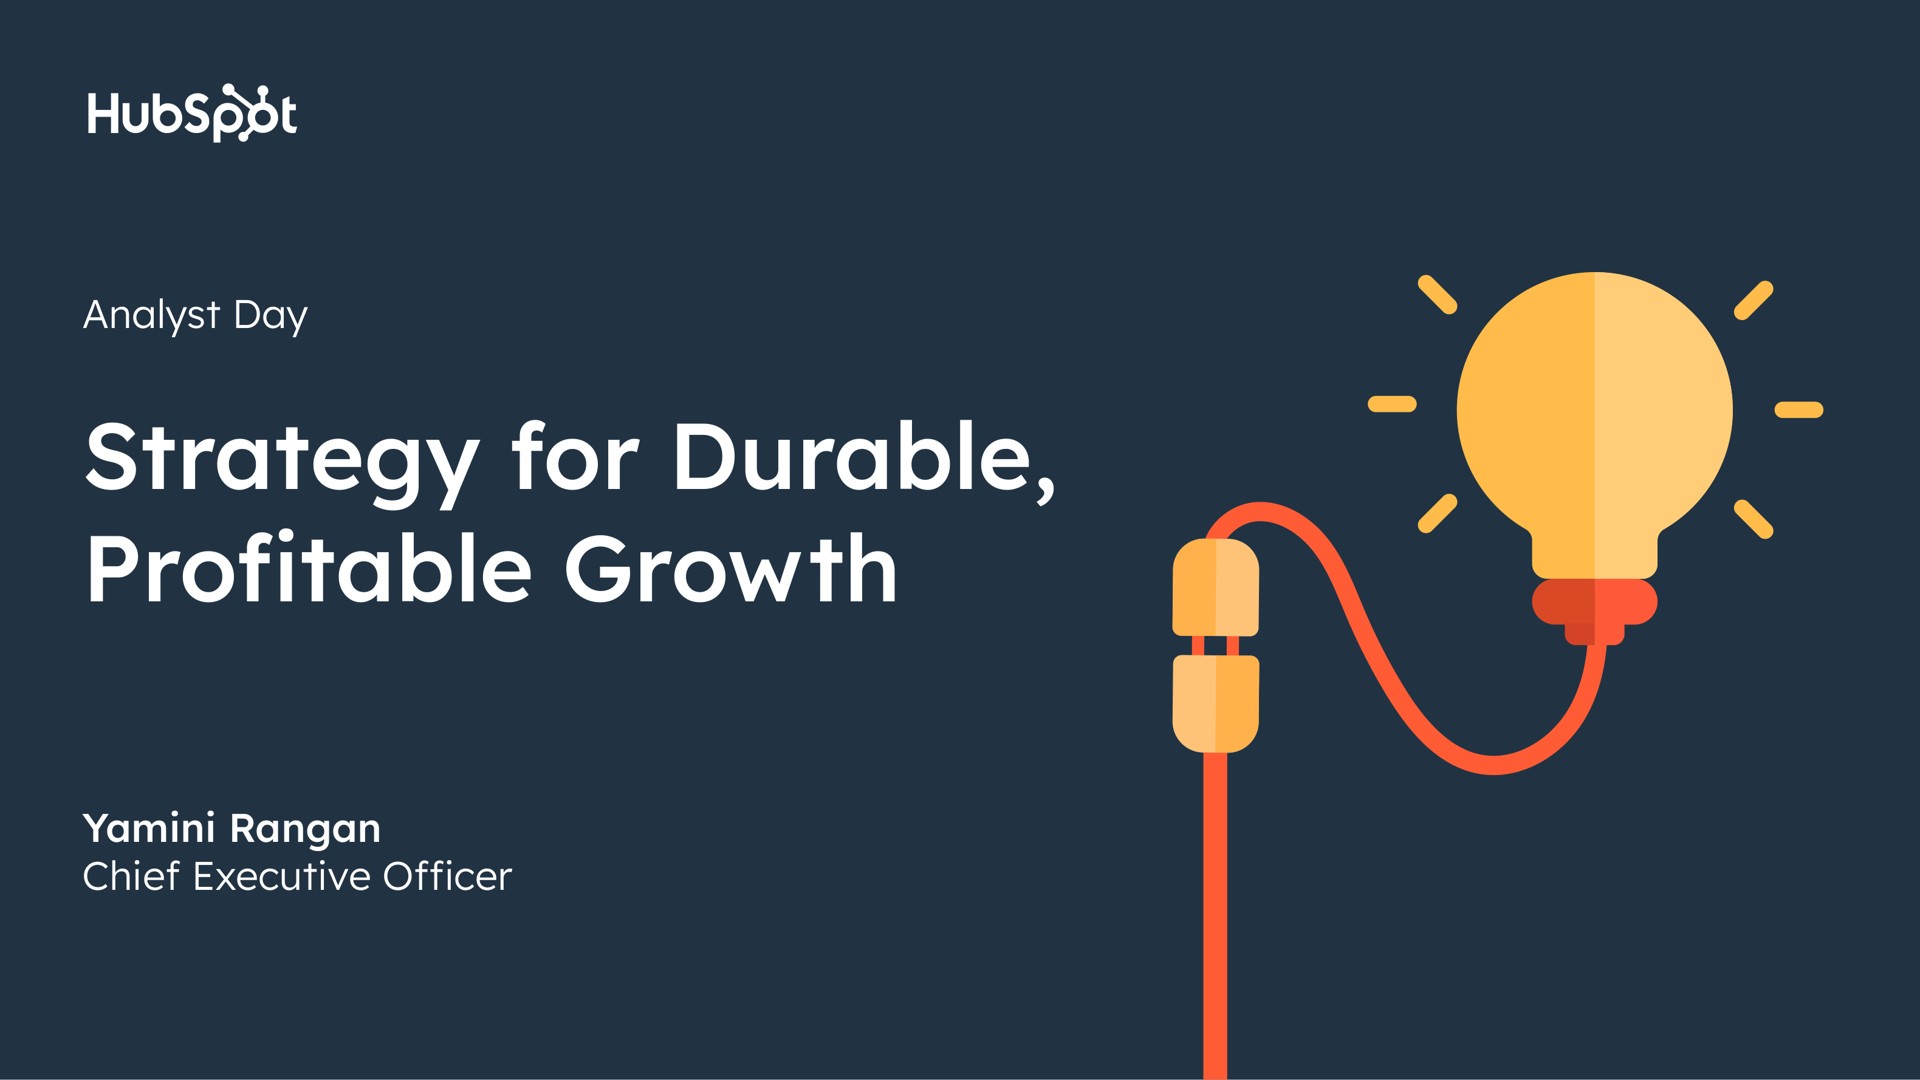 strategy for durable pro table growth a wain | Hubspot